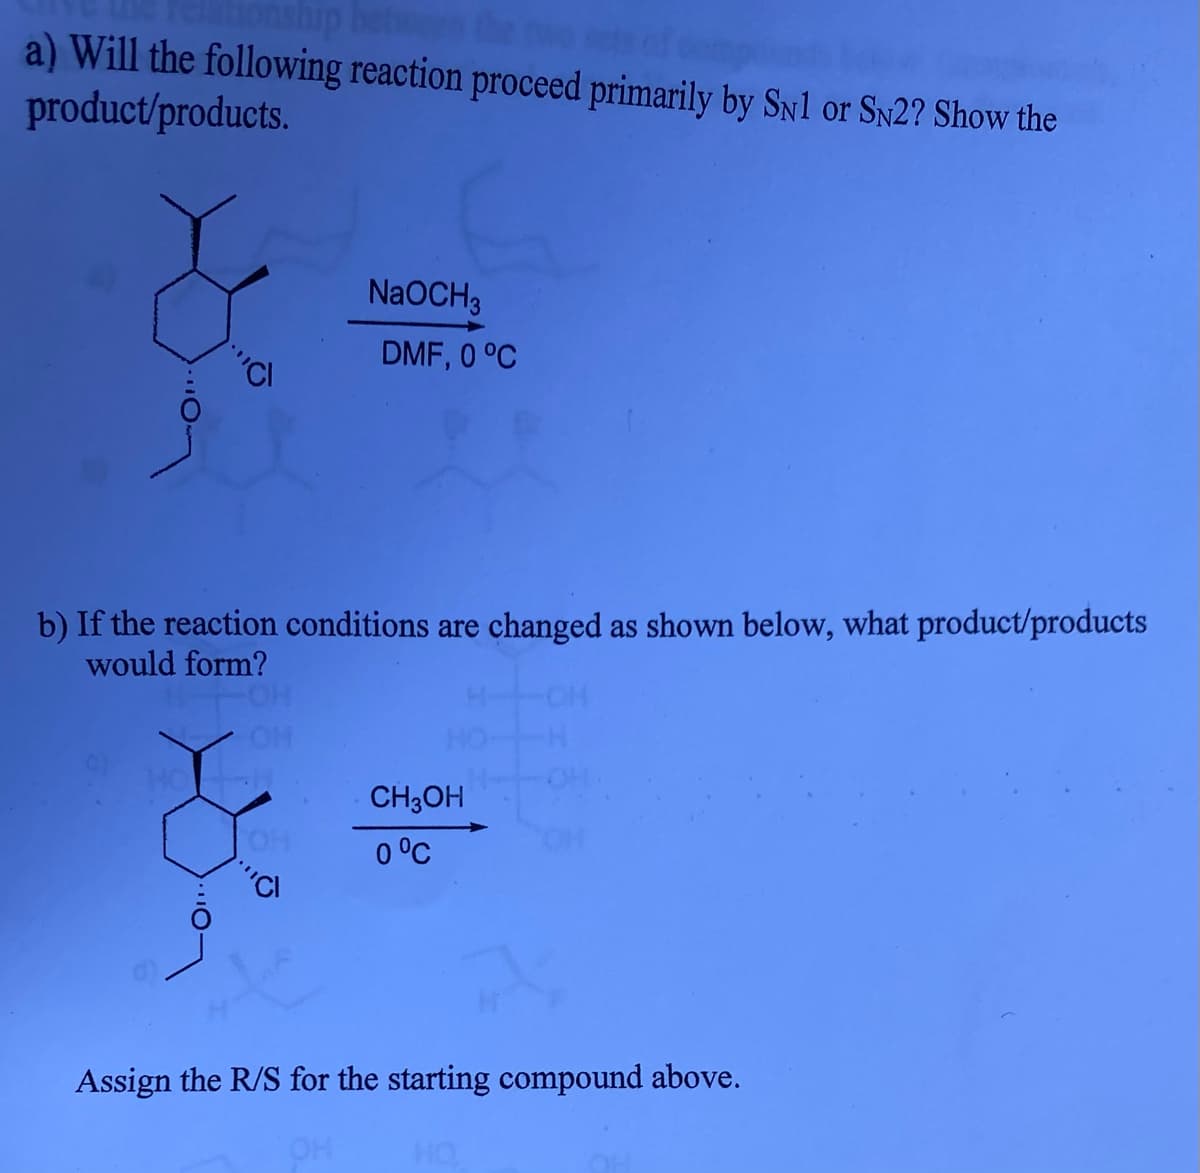 onship
a) Will the following reaction proceed primarily by Sn1 or Sy2? Show the
product/products.
NaOCH3
DMF, 0 °C
b) If the reaction conditions are changed as shown below, what product/products
would form?
CH3OH
OH
0 °C
Assign the R/S for the starting compound above.
OH
HO
